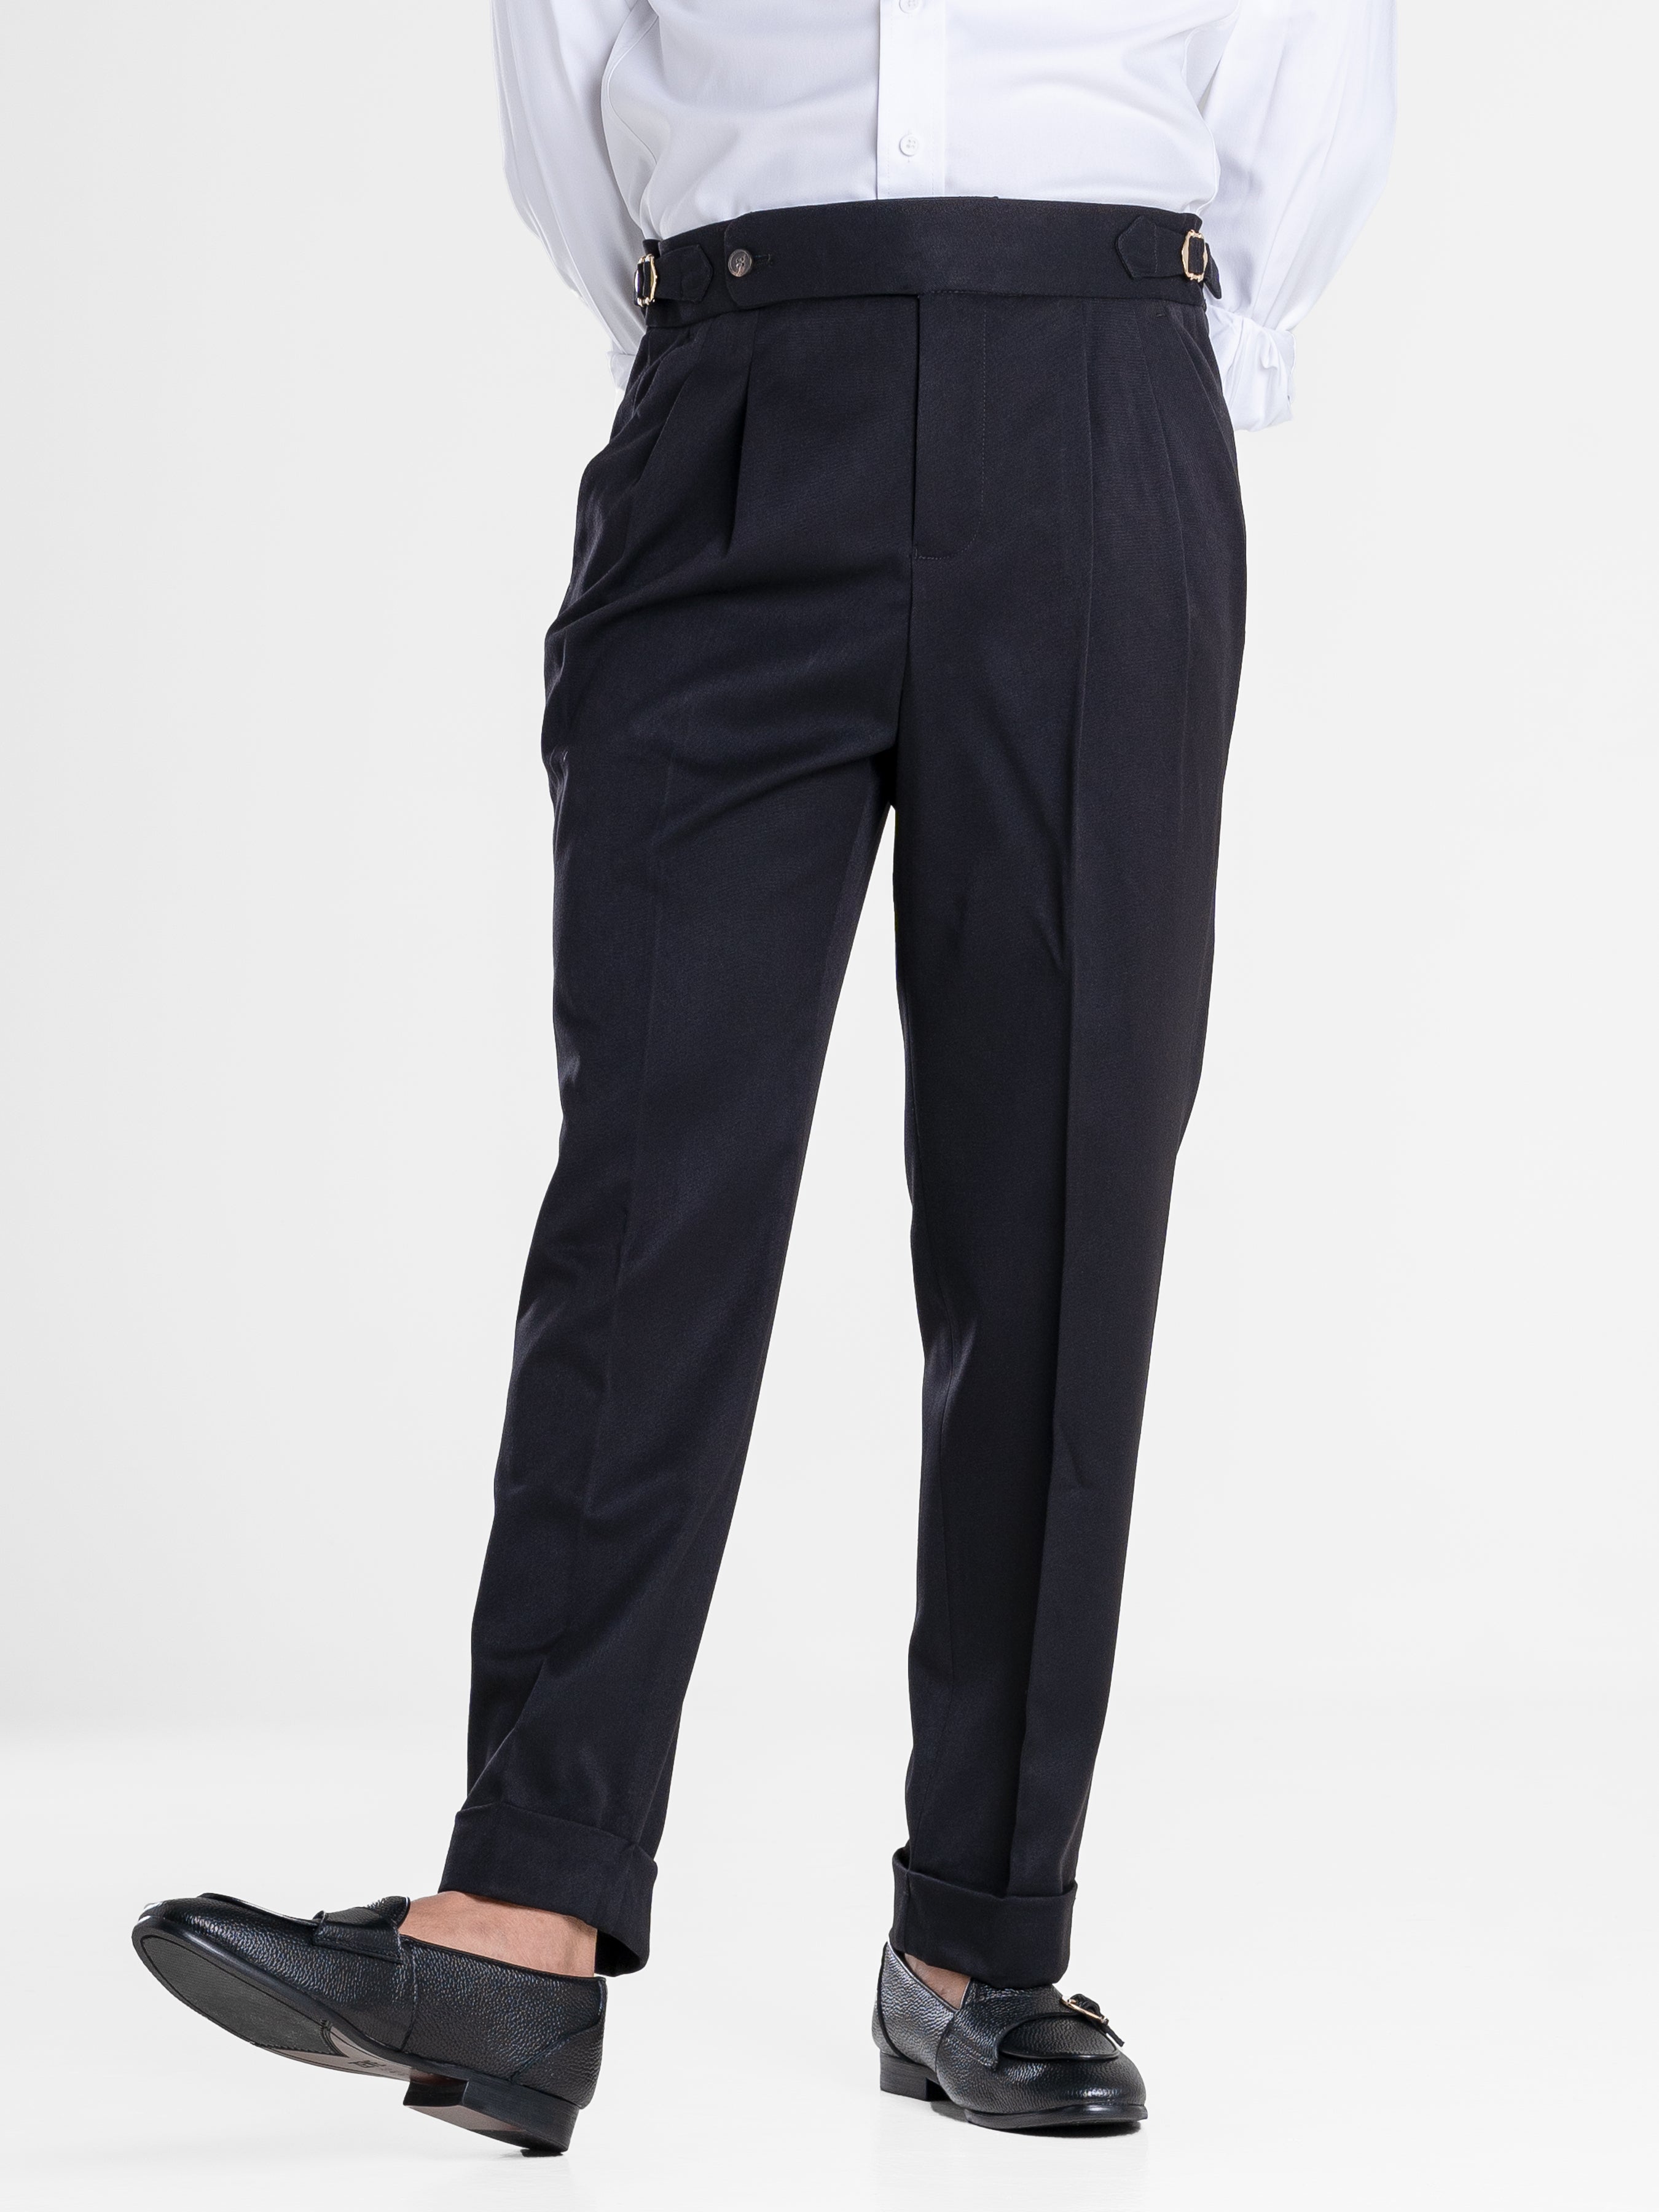 Trousers With Side Adjusters - Black Solid Cuffed (Stretchable) | Zeve ...